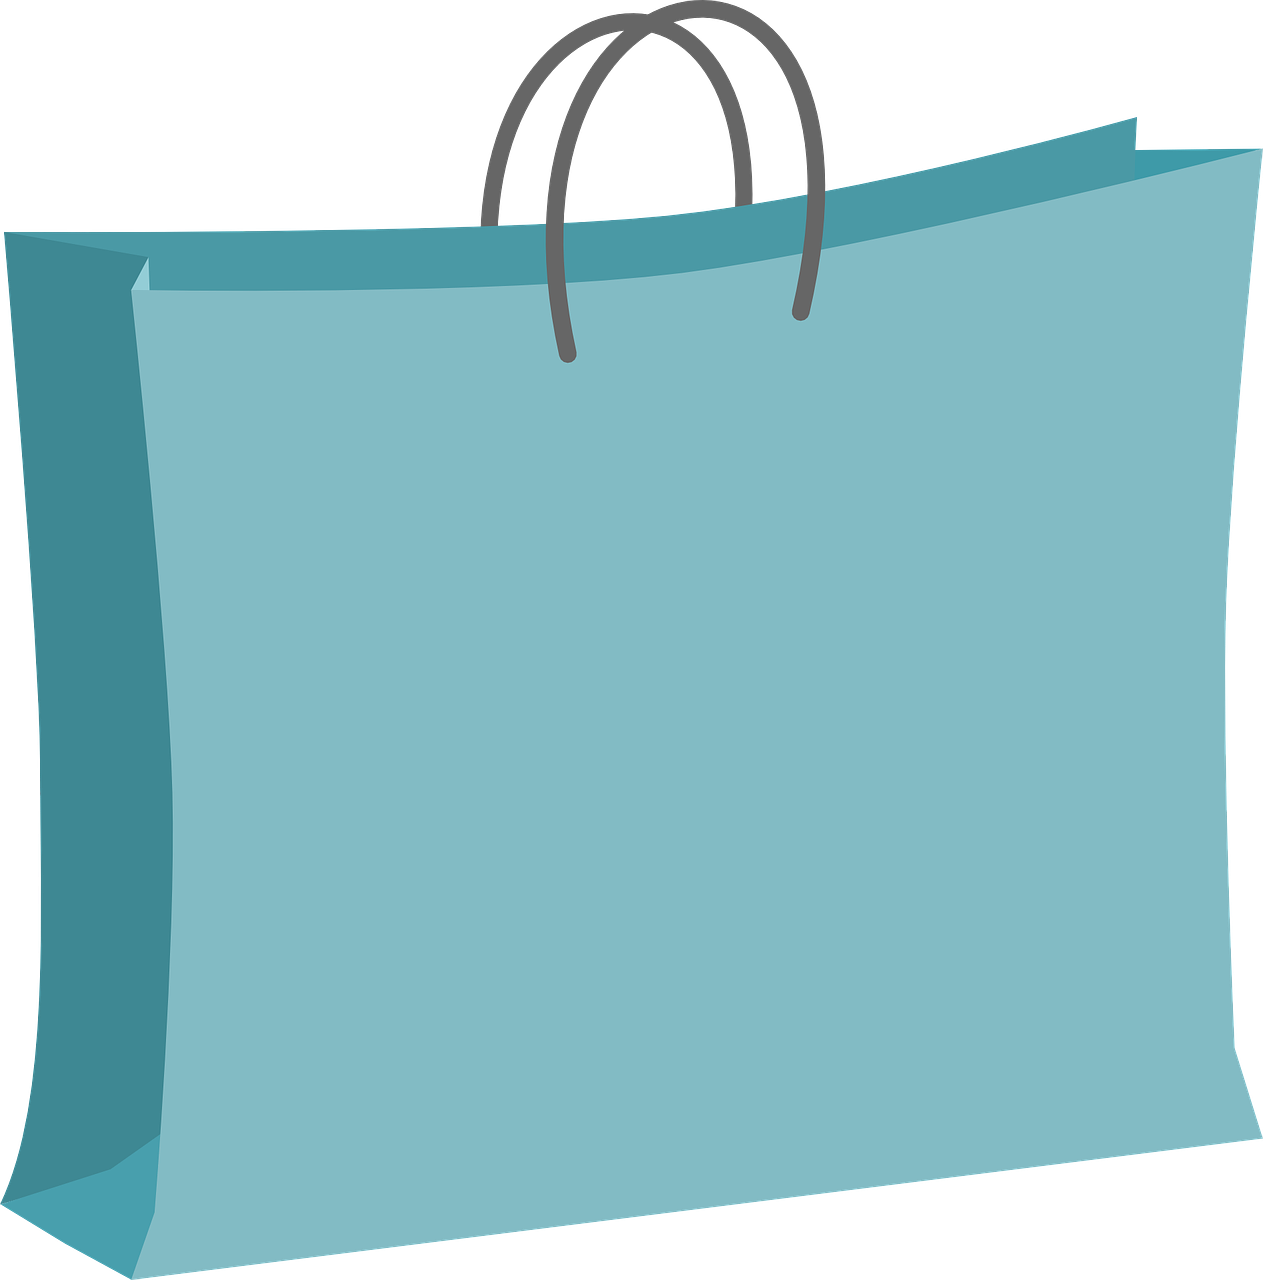 Are you looking for a clip art of a shopping bag for use on your shopping projects? Search no more as you can use this green shopping bag clip art for ...